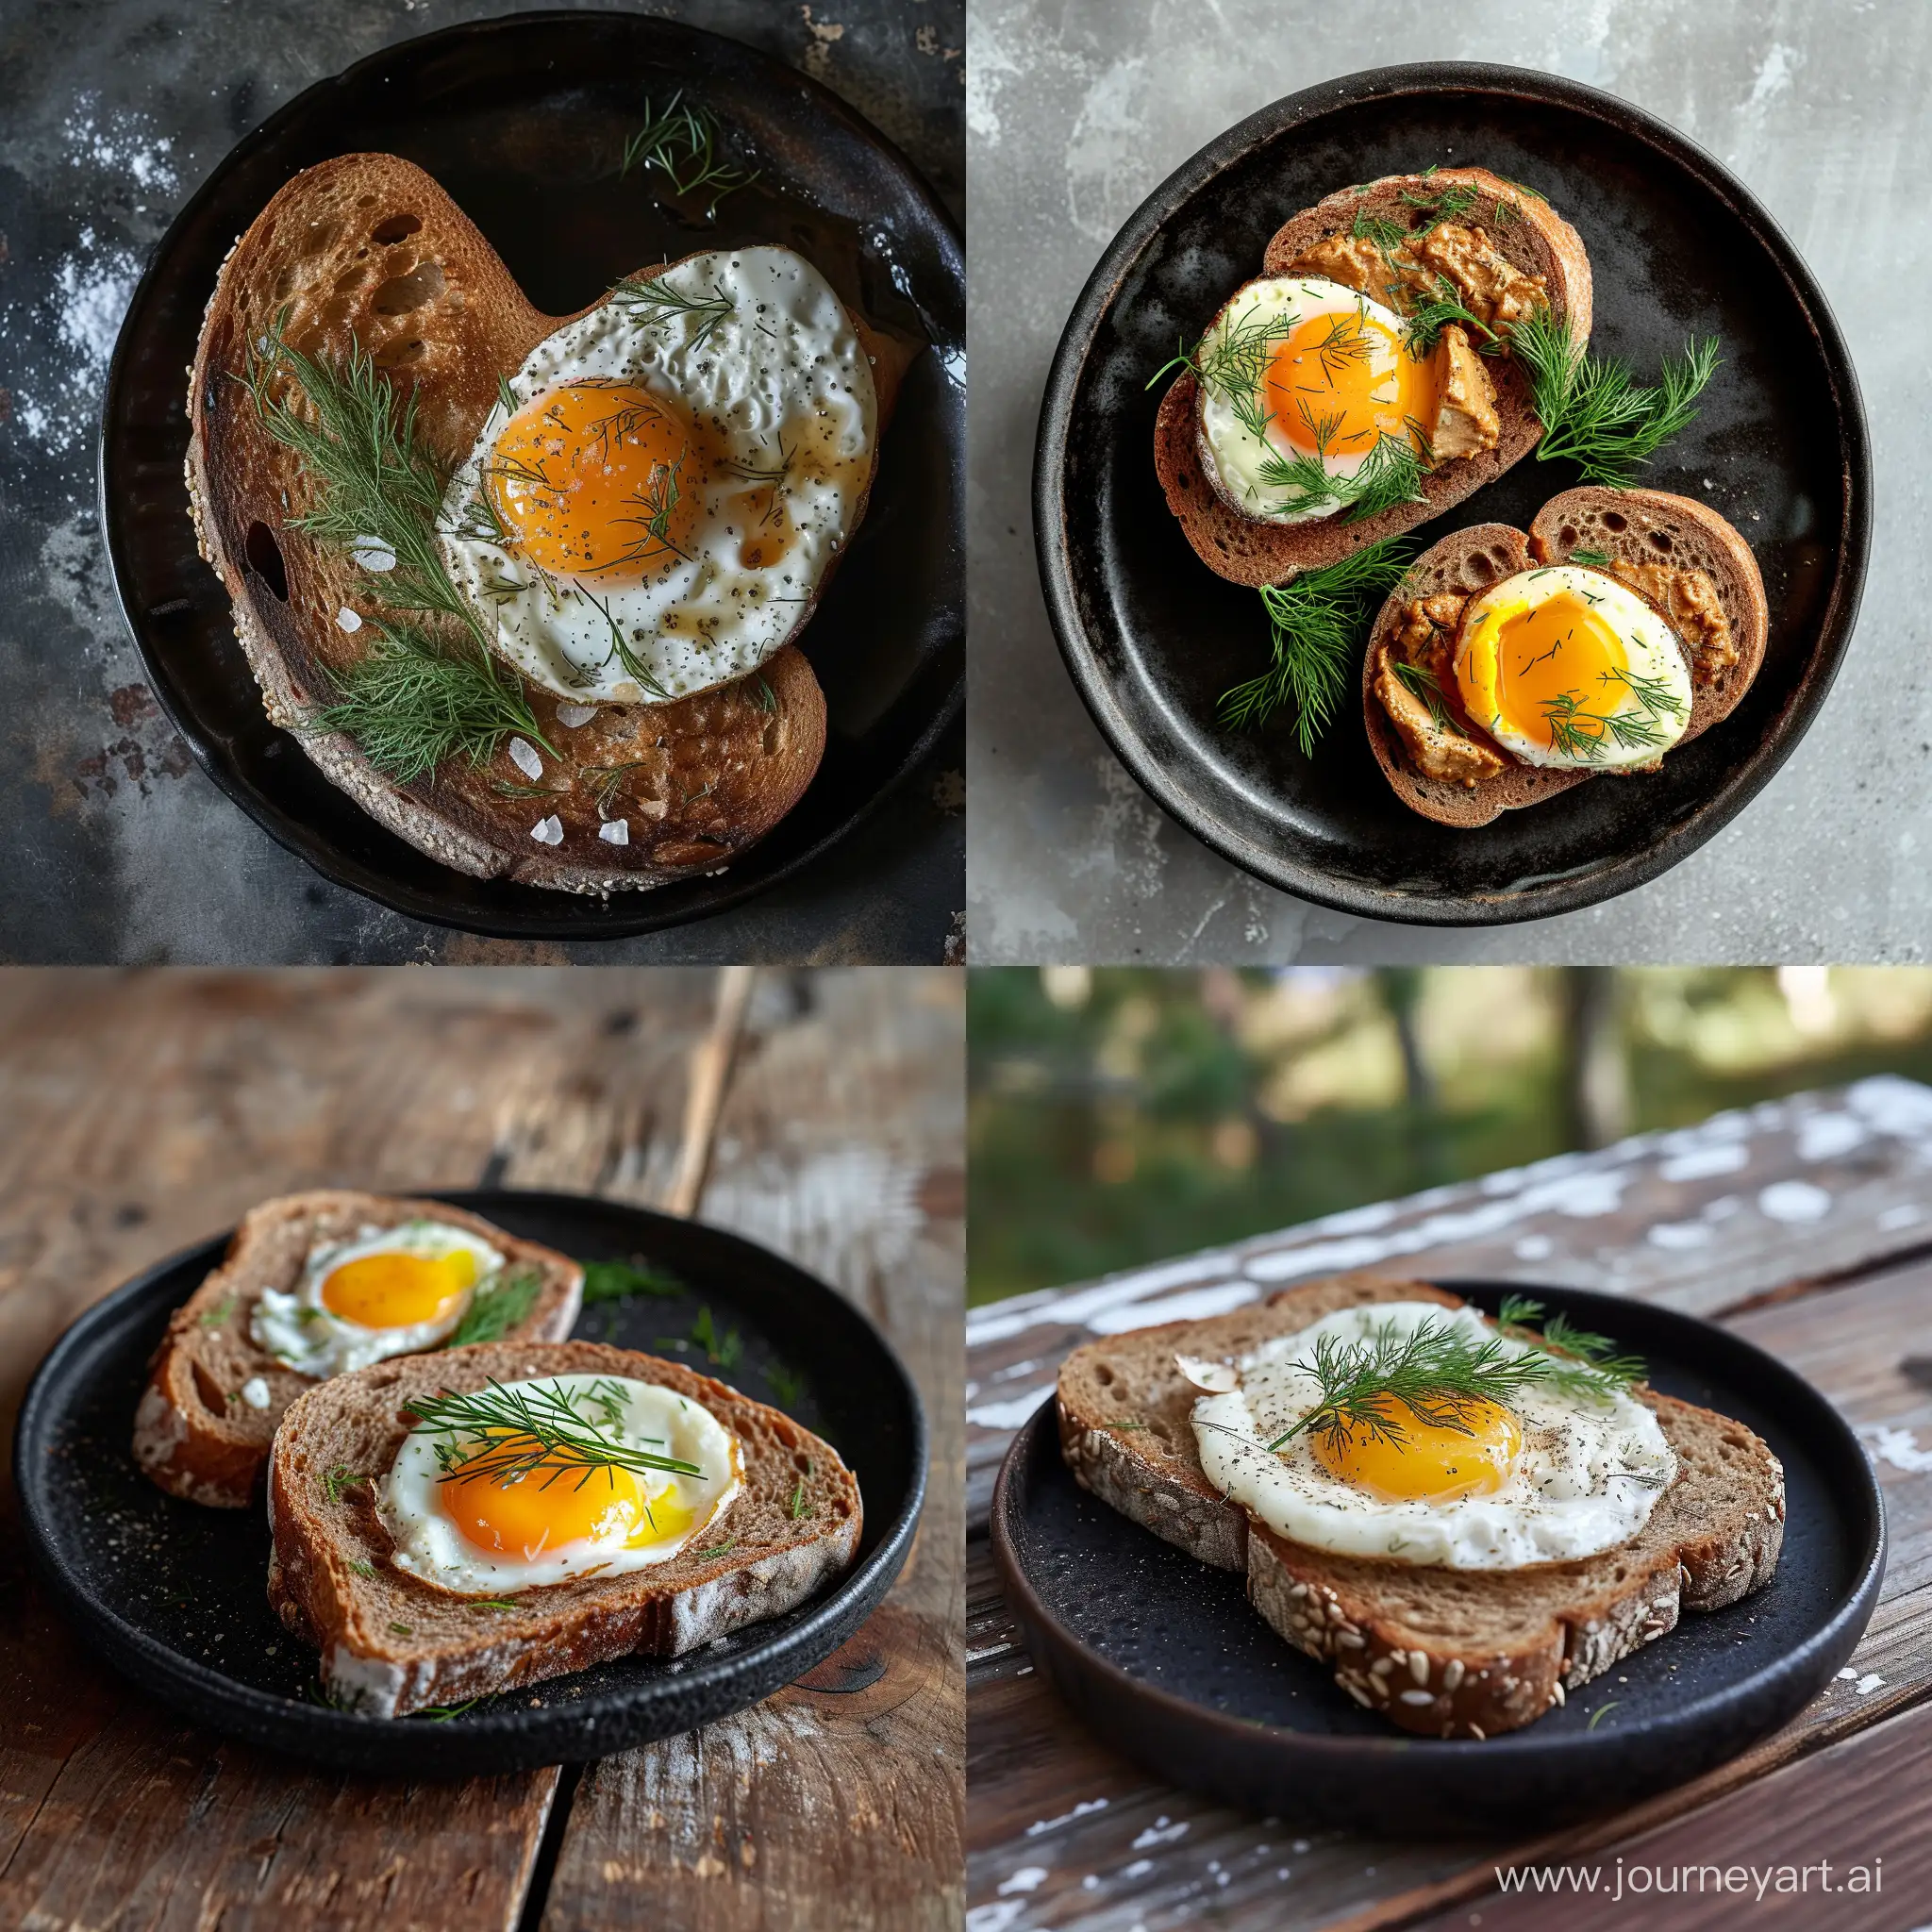 Delicious-Rye-Bread-Toast-with-Egg-and-Dill-on-Dark-Plate